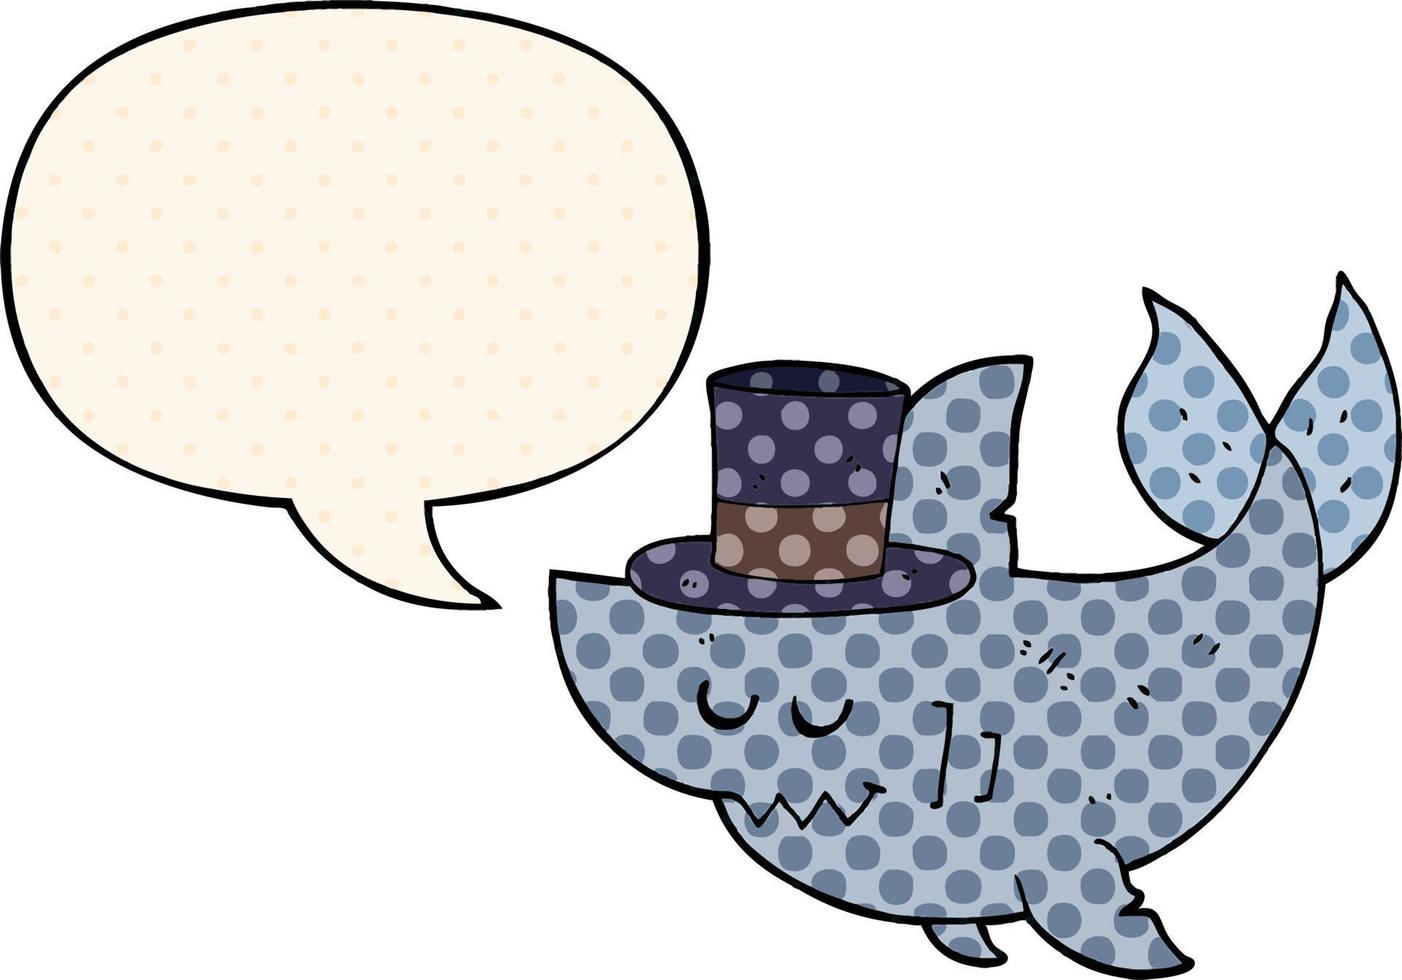 cartoon shark wearing top hat and speech bubble in comic book style vector